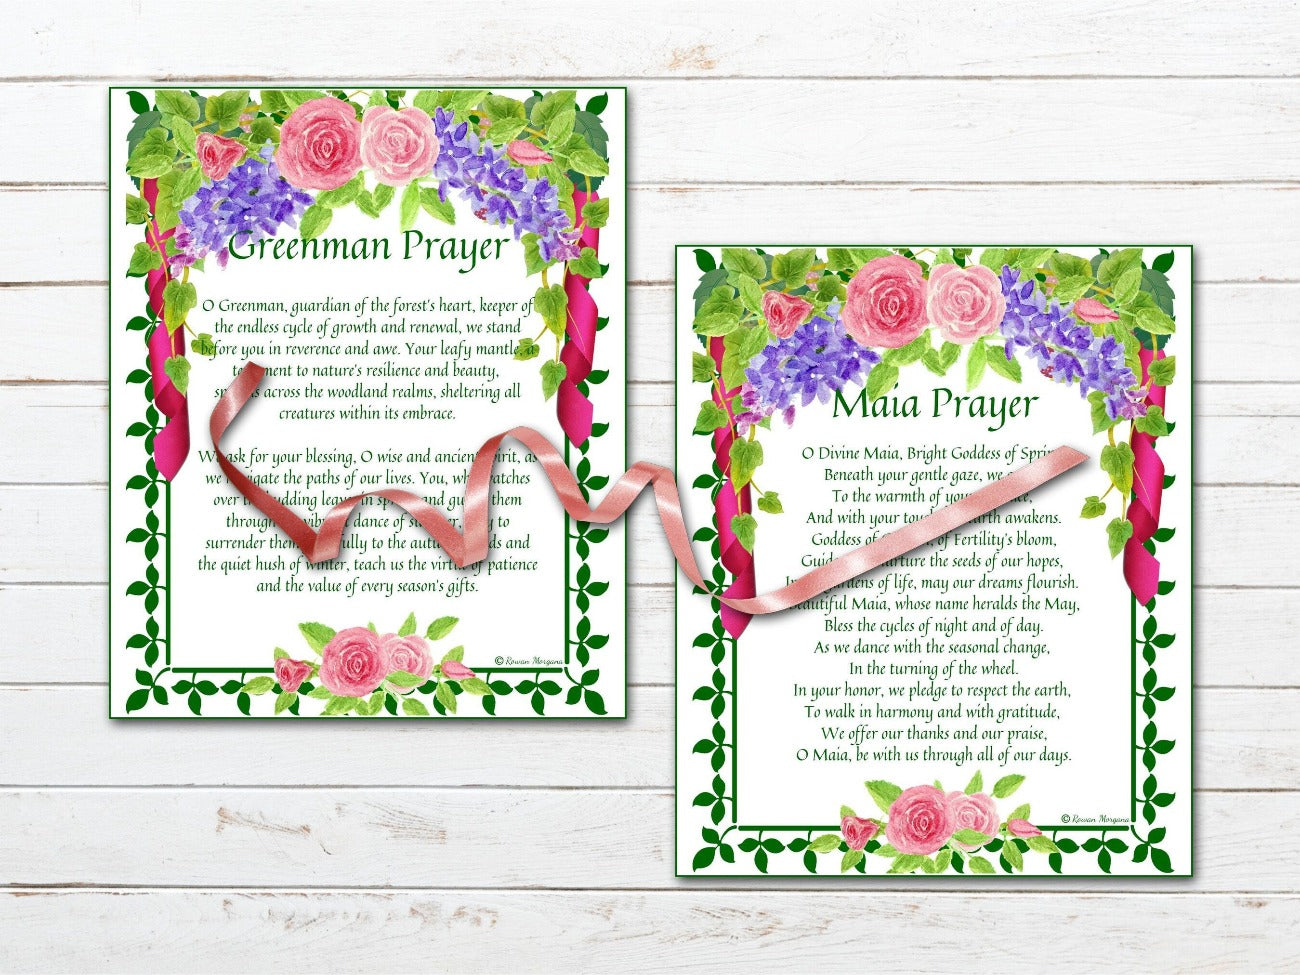 BELTANE SPELL CARDS, Have a white background, green ivy border and pretty pastel florals at the top and bottom. Greenman Prayer and Maia Prayer cards are featured - Morgana Magick Spell